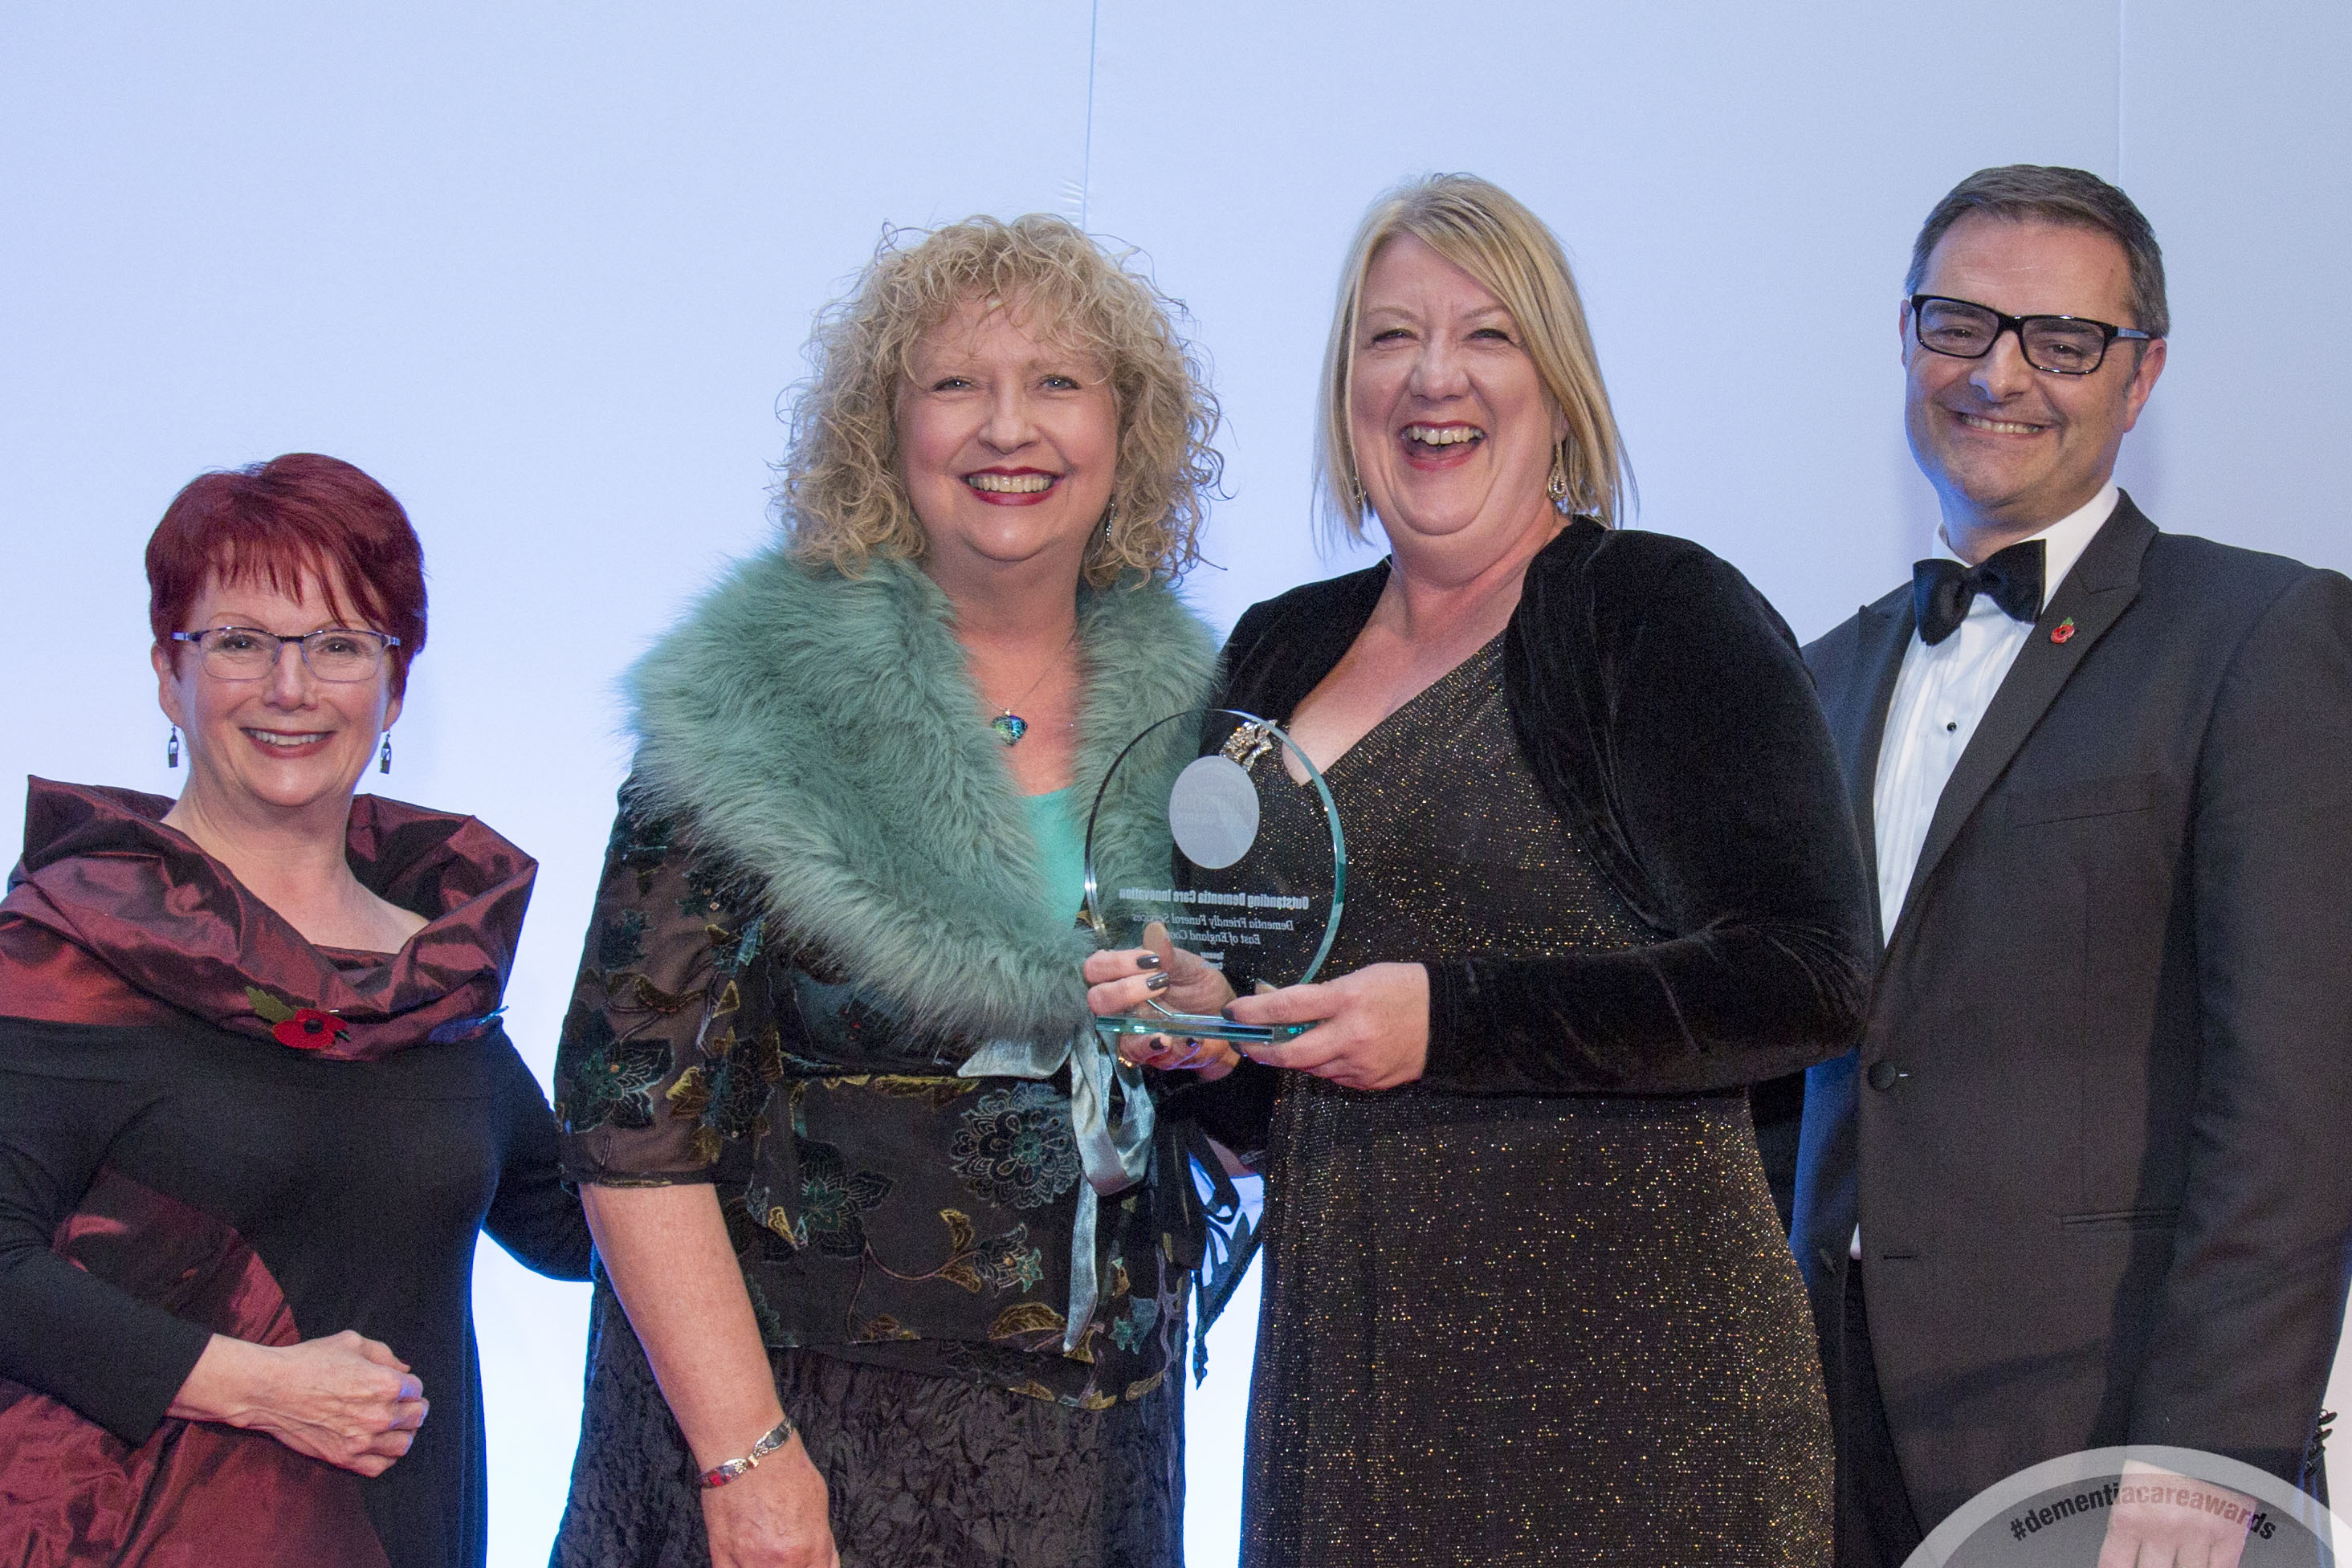 Danuta Lipinska (second from the left) receives the Outstanding Dementia Care award